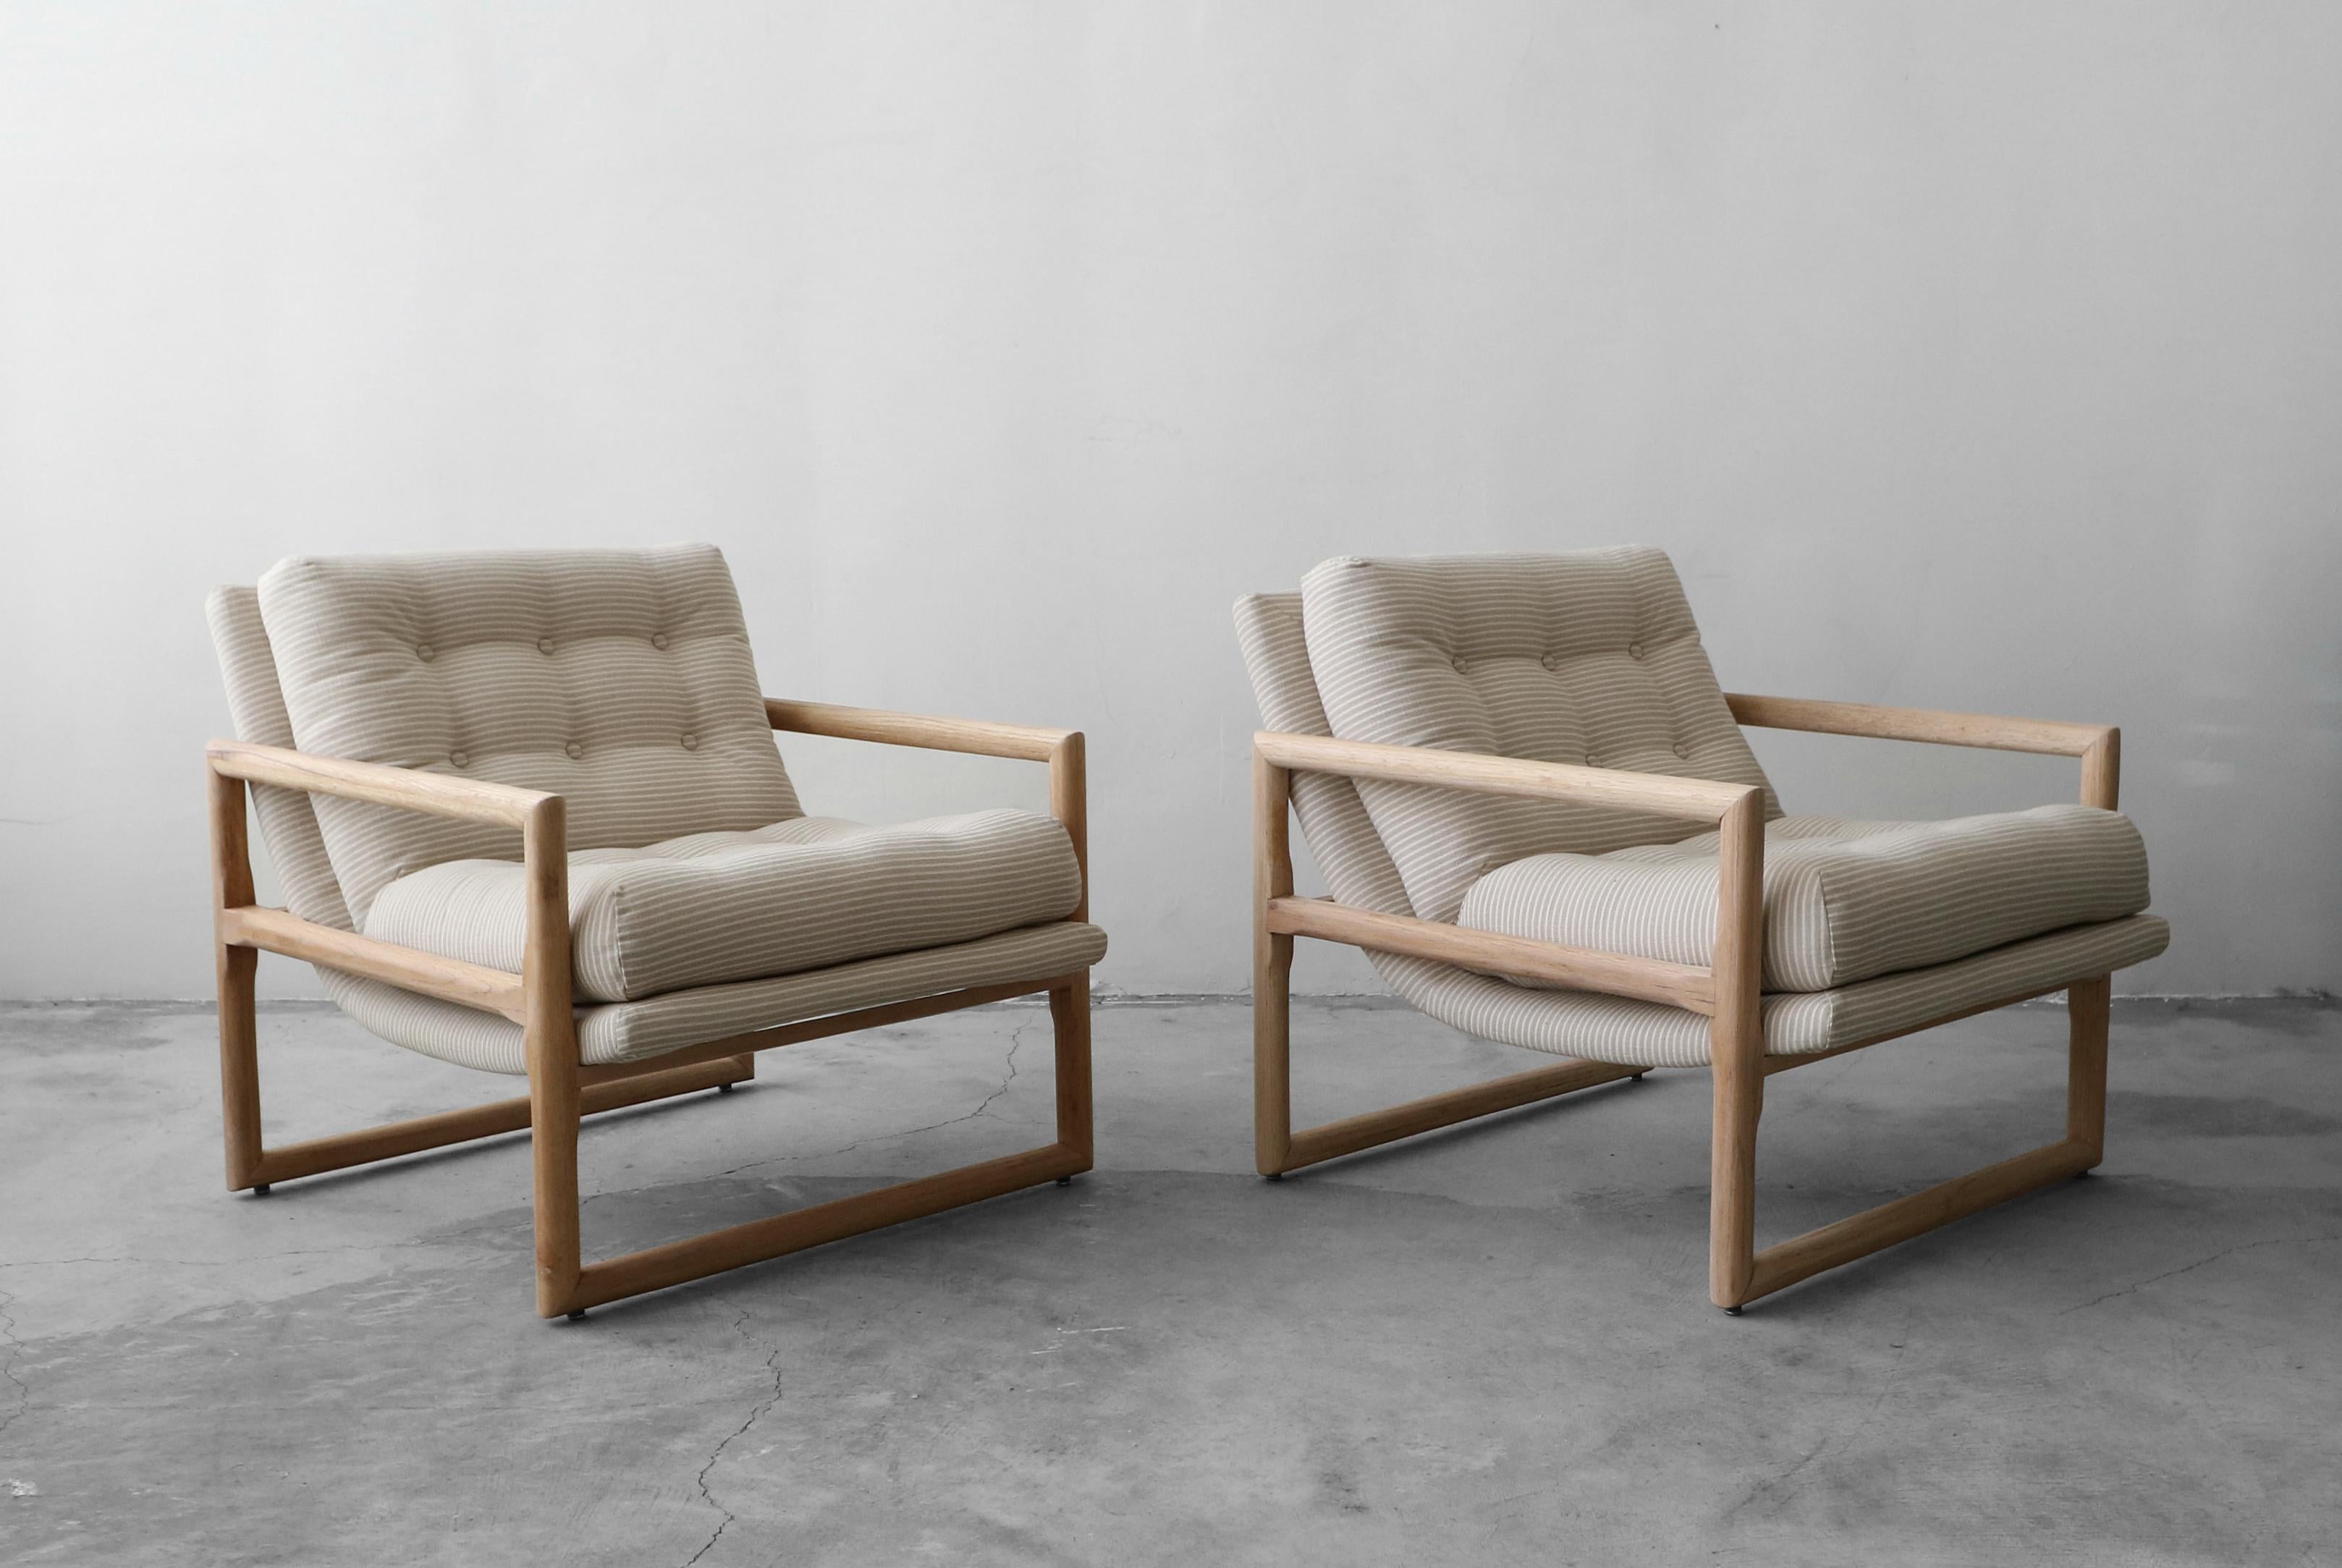 If you're looking for the perfect pair of Minimalist lounge chairs, look no further. This beautiful pair of oak Milo Baughman scoop chairs have been taken out of the 1960s and brought in to 2019. They have all new neutral pinstripe fabric and the